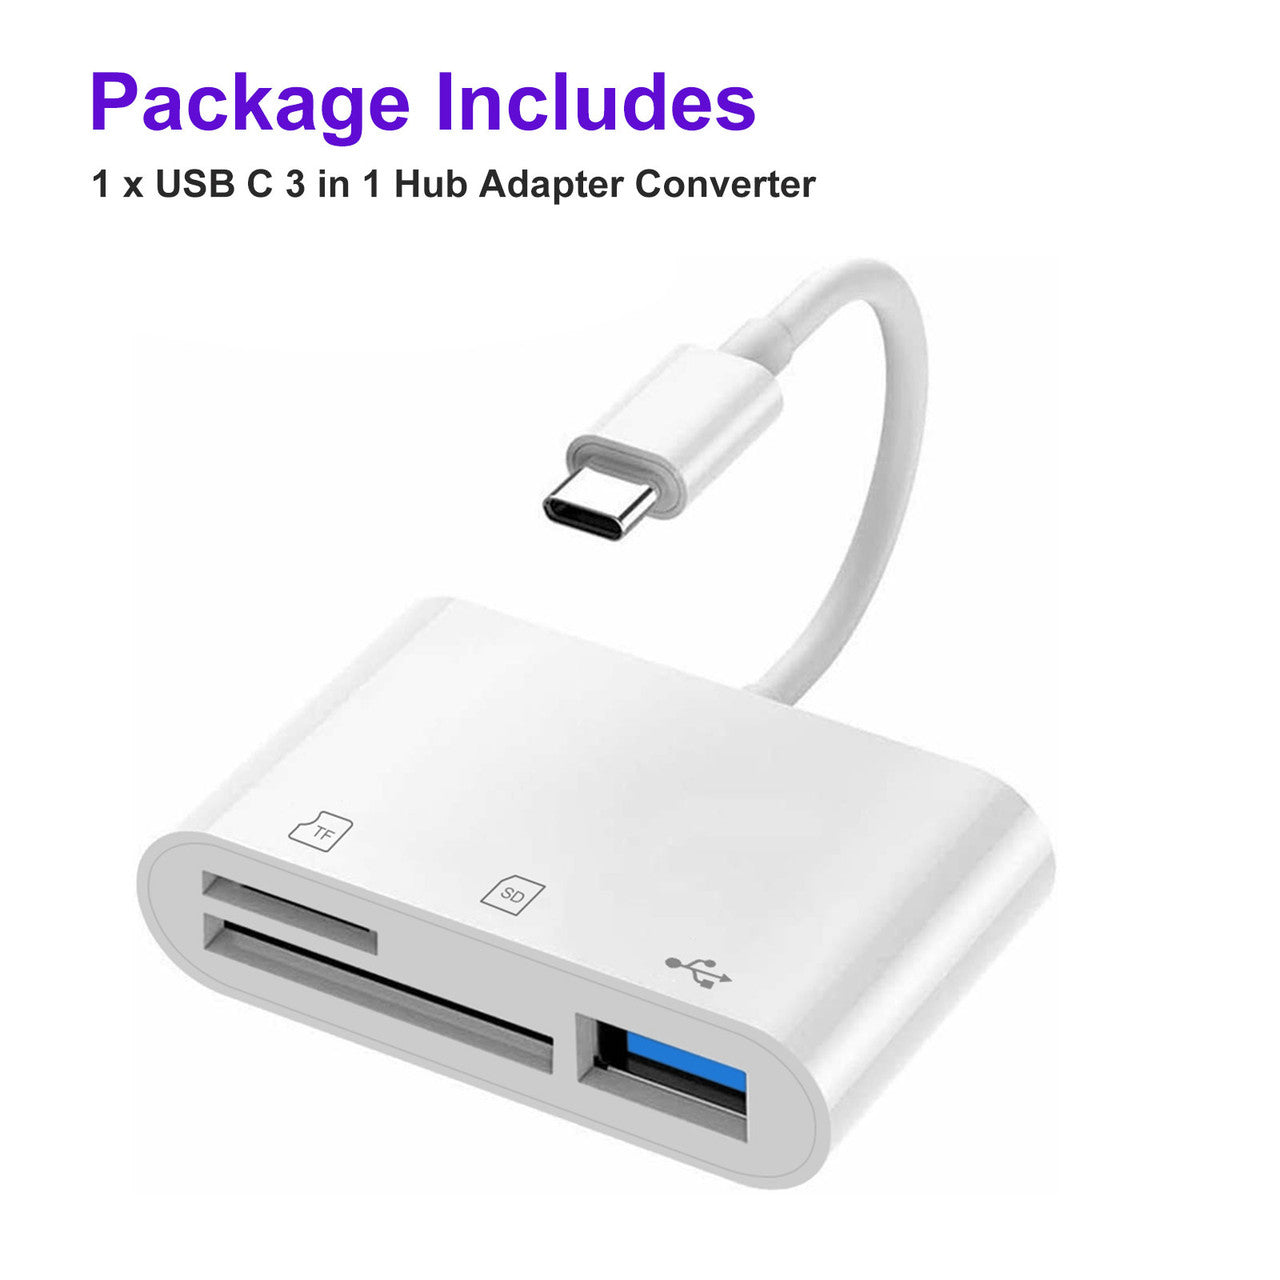 3 IN 1 Portable Space Aluminum Dongle Compatible with MacBook Pro/Air, Dell XPS, More Type C Devices